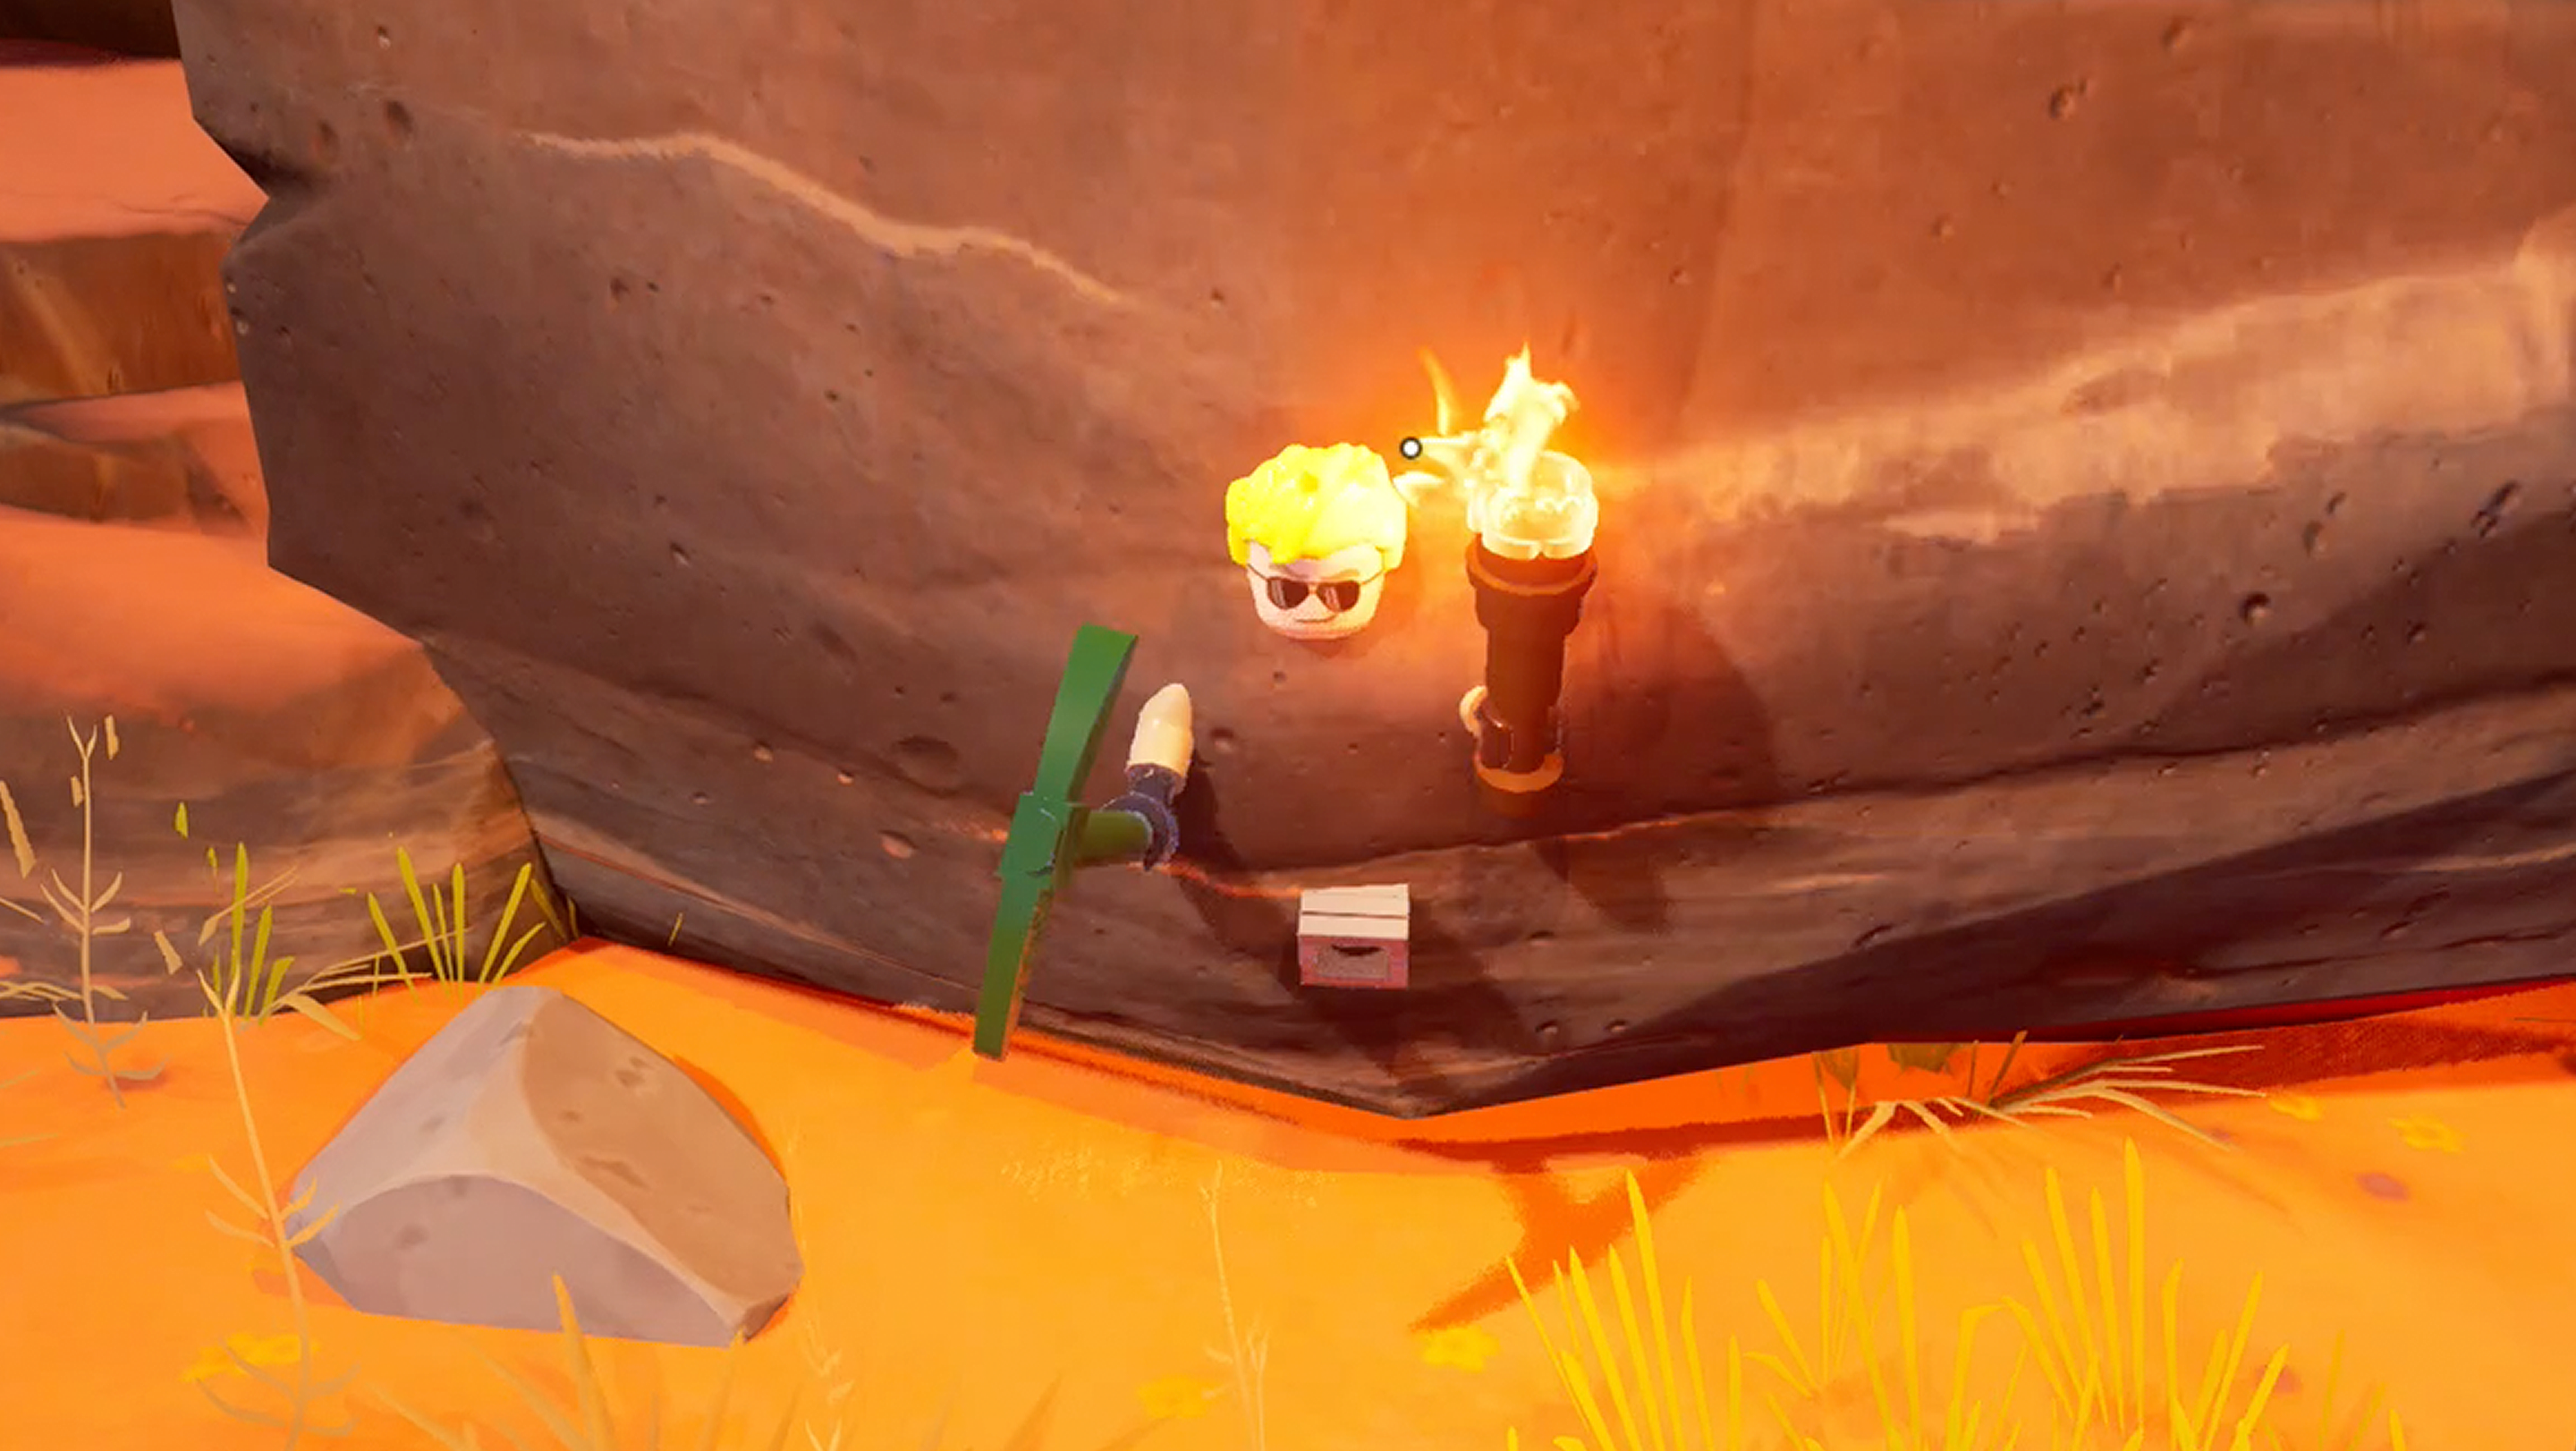 Lego Fortnite player clipping through a rock in the desert